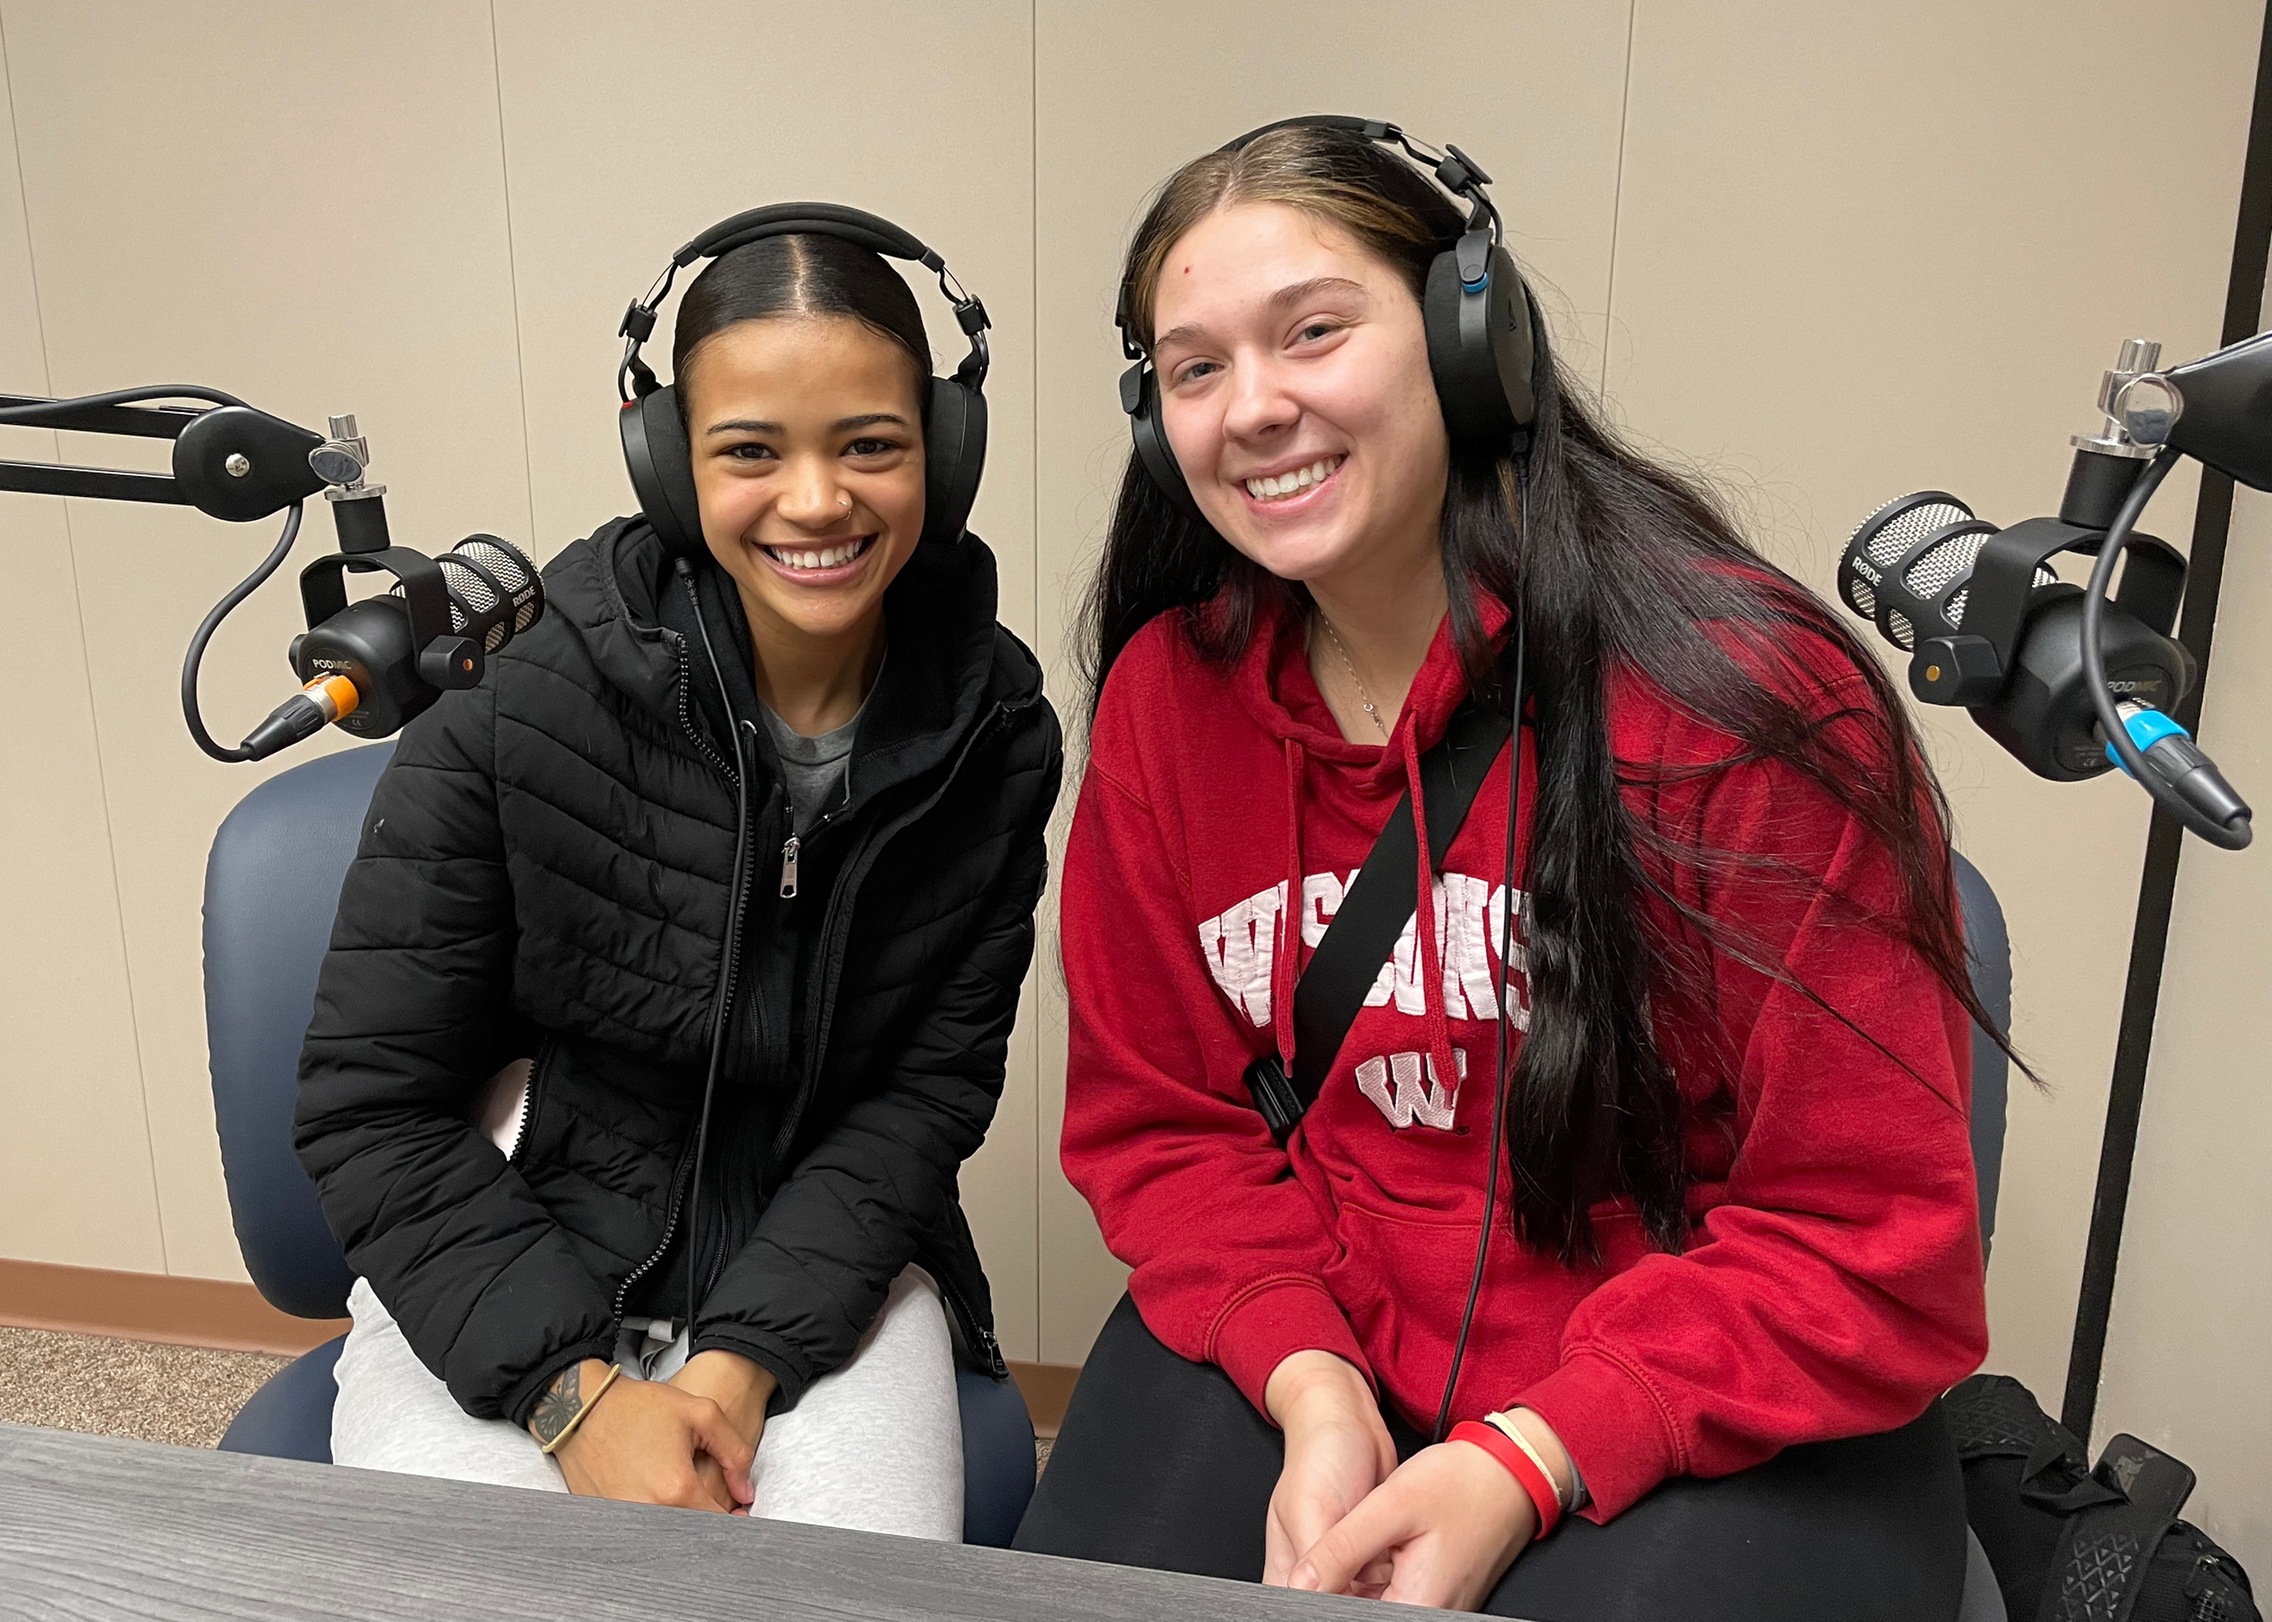 Sandburg women's basketball players Kelci Shelton (left) and Brook Pieper (right) were the guests for Episode 19 of the Sandburg Athletics Podcast.